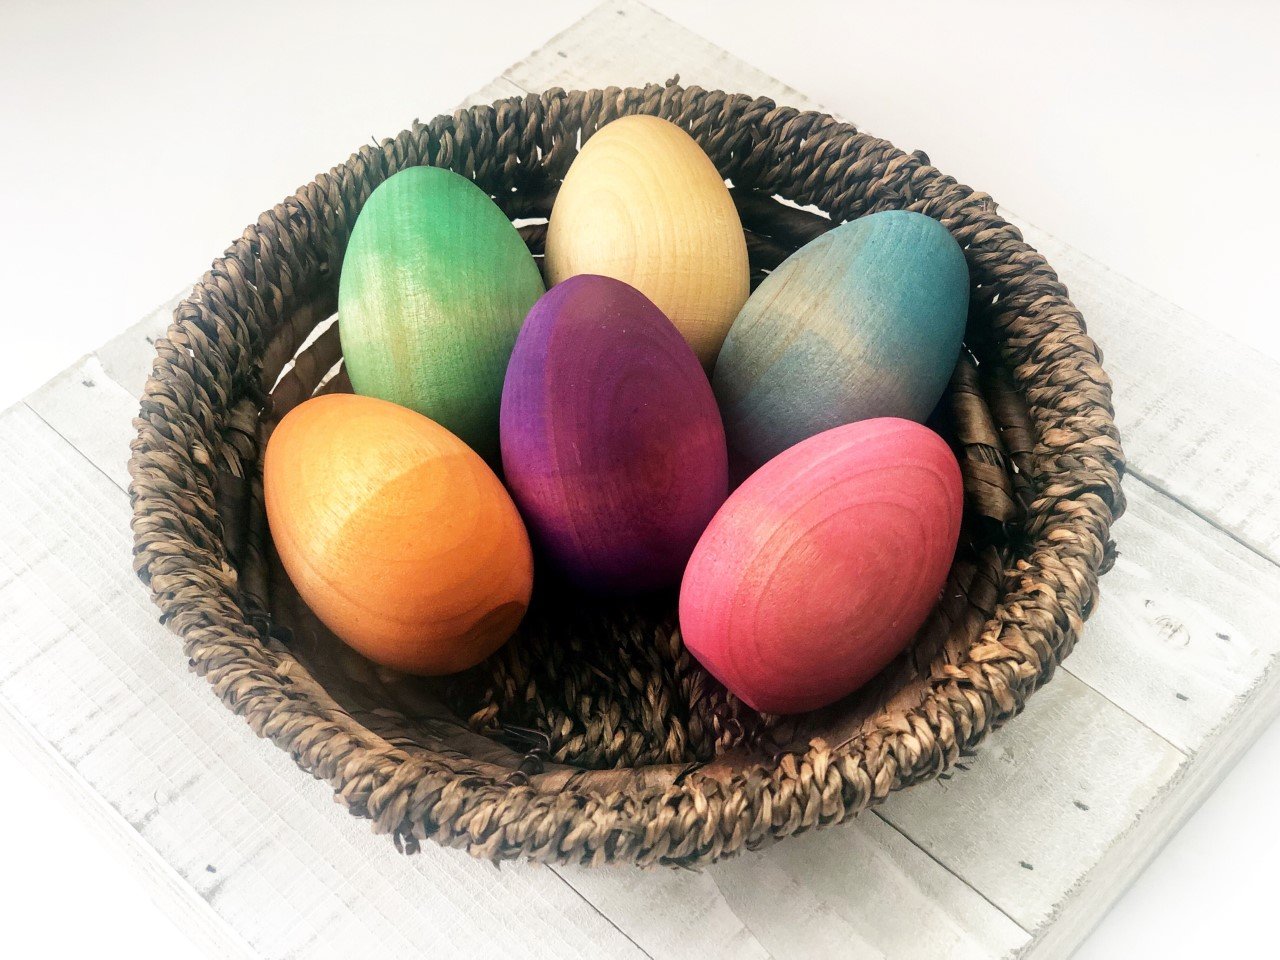 Rainbow Wooden Easter Eggs (Set of 6) by Legacy Learning Academy